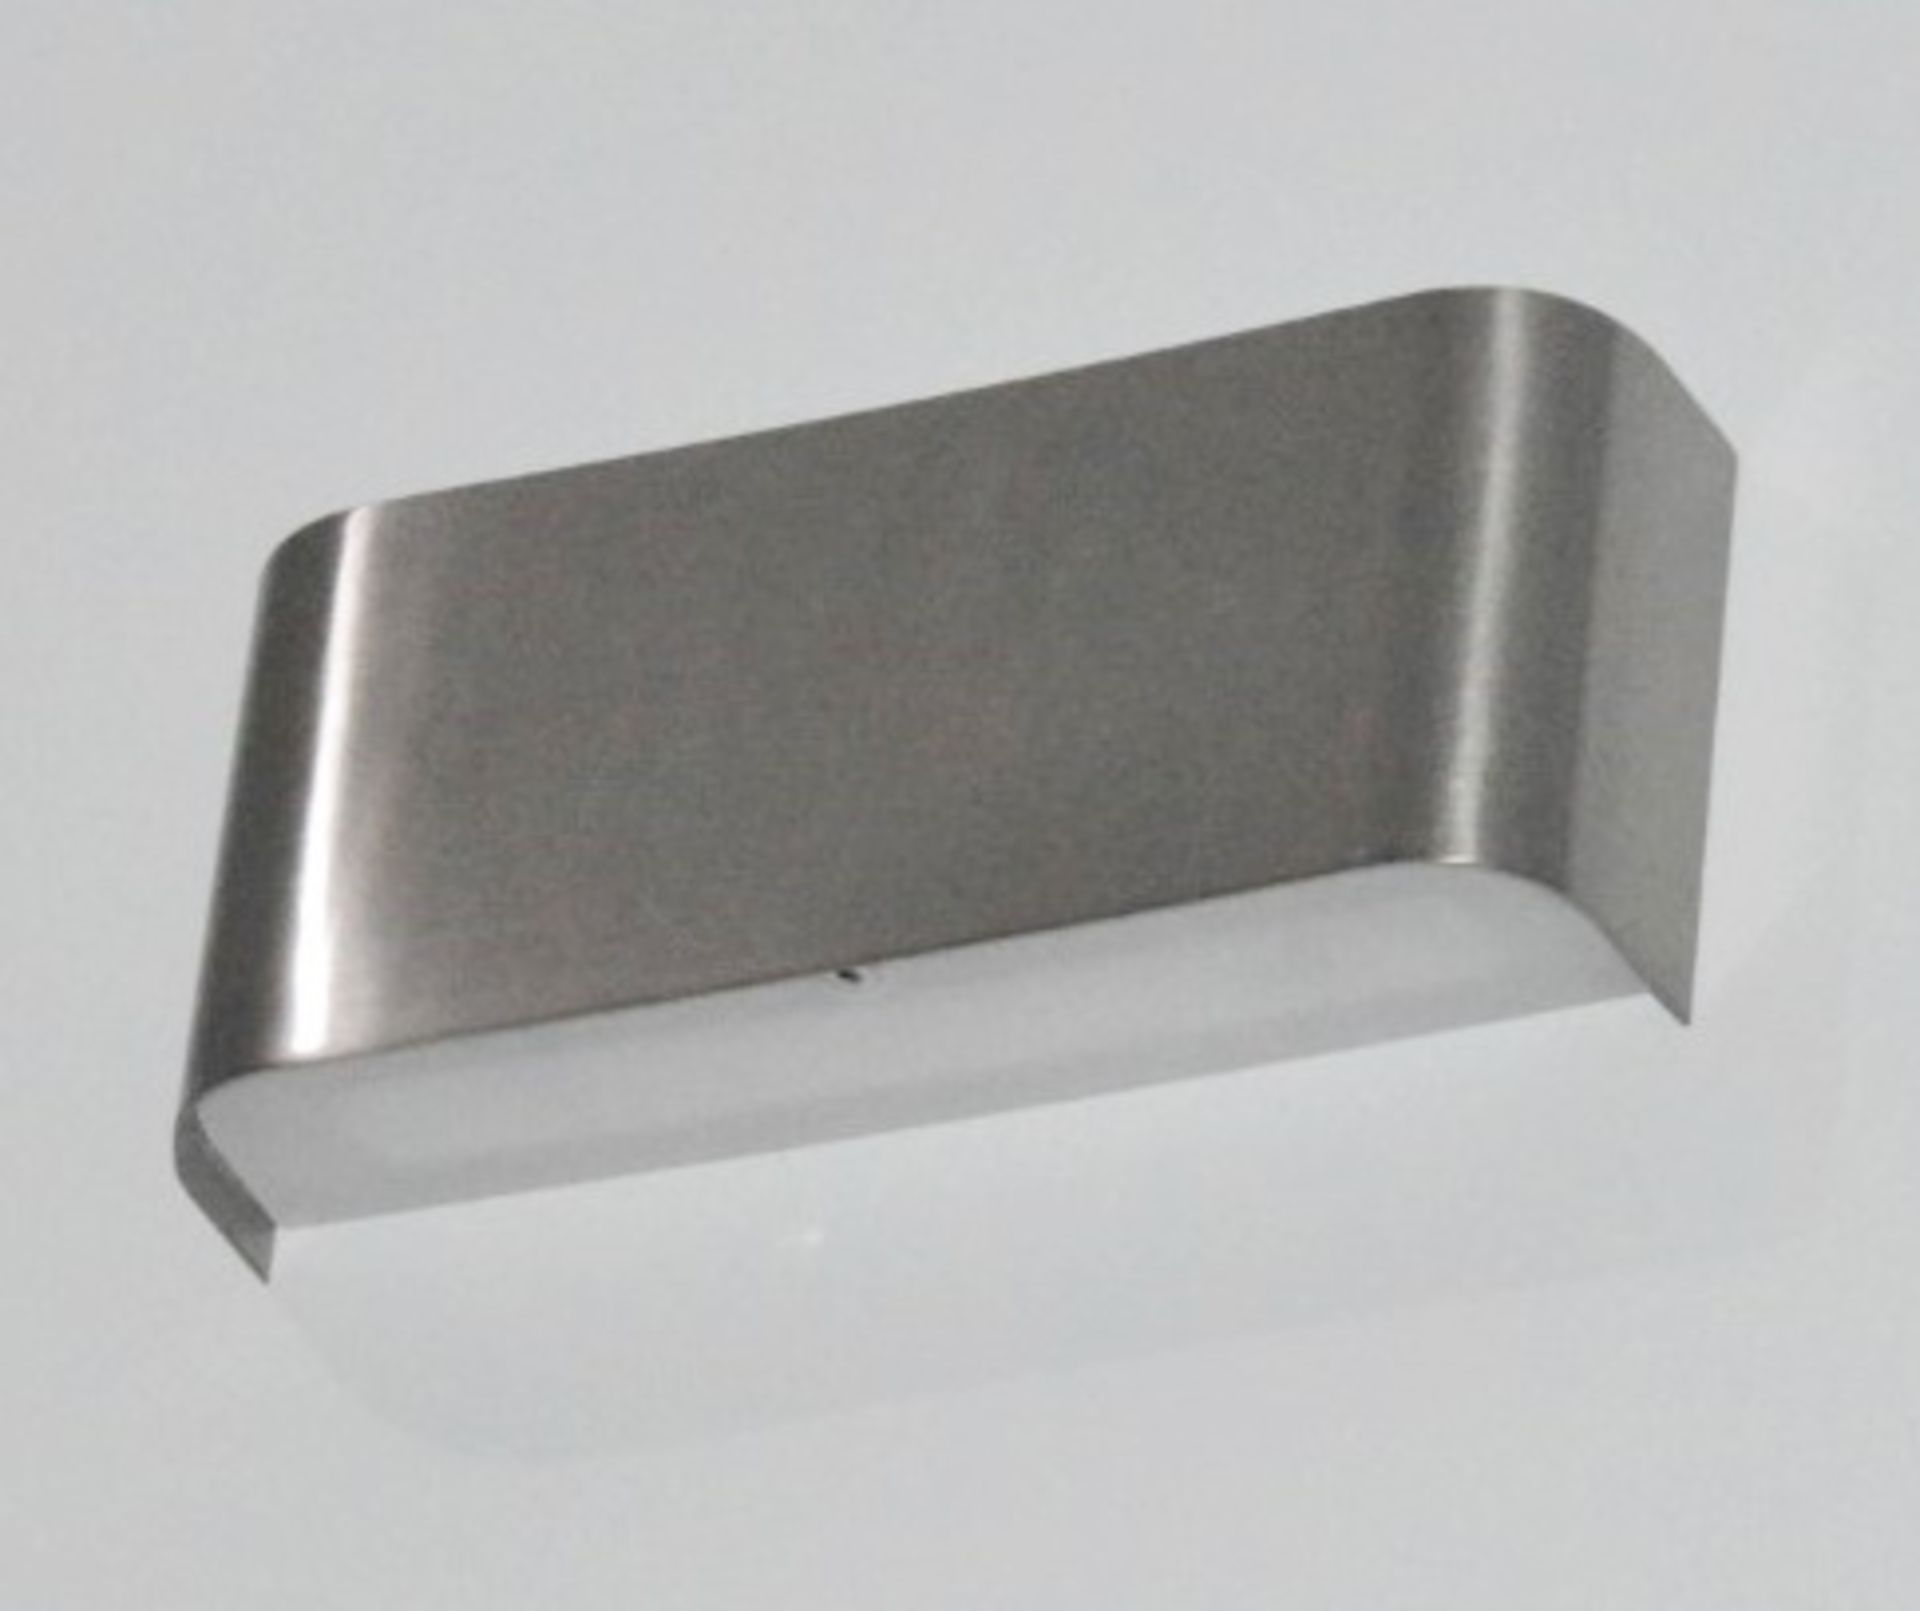 1 x Satin Silver Oblong Curved Wall Light With Up & Down 2 Light LED - RRP £96.00 - Image 2 of 3